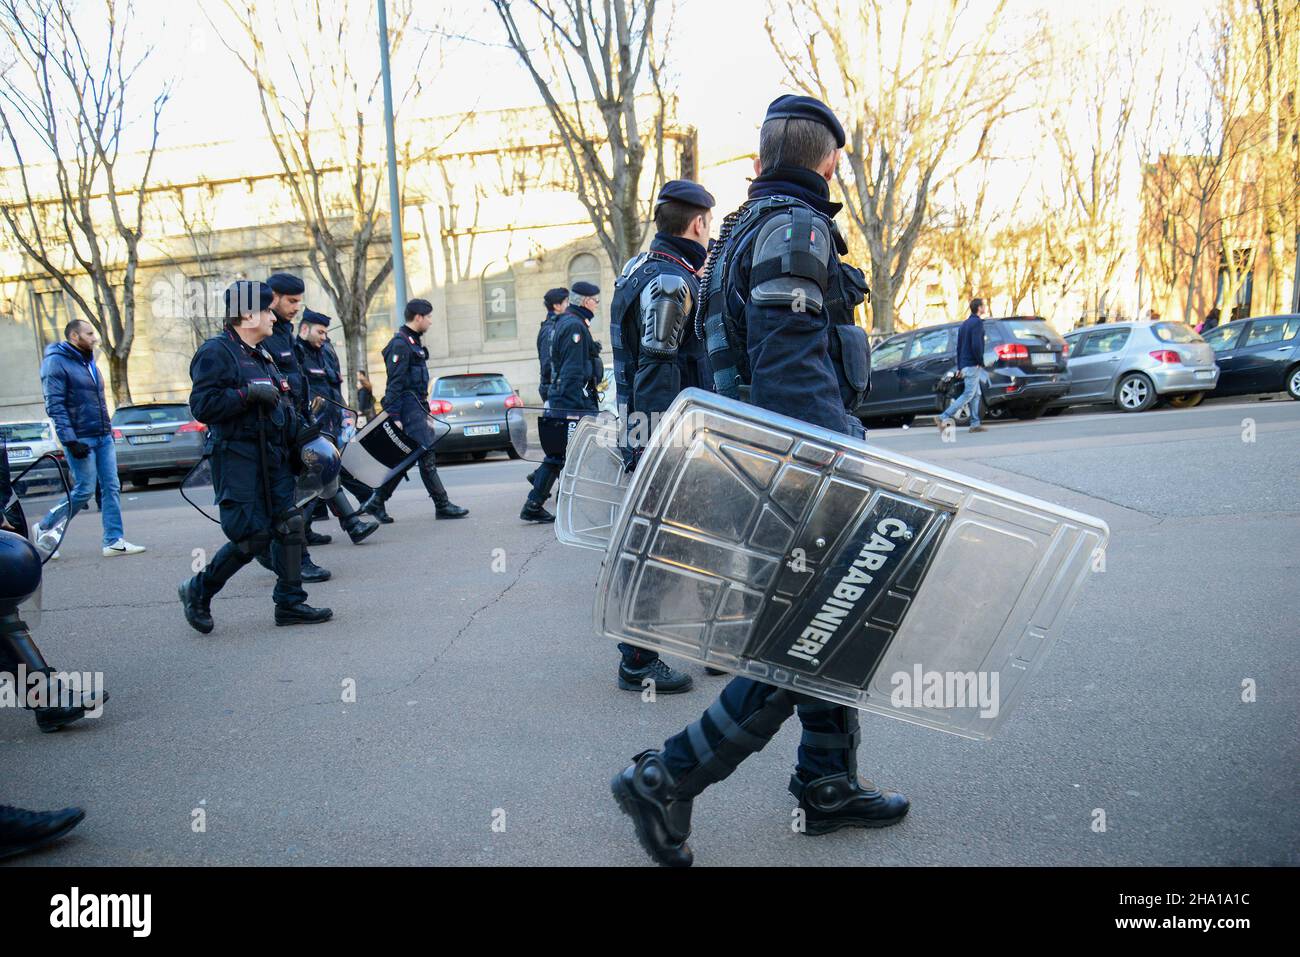 02-22-2014  Milan .   Carabineries ( policemen ) in Milan on some demonstation : young and old men   in with , protective  ammunition and  shields Stock Photo